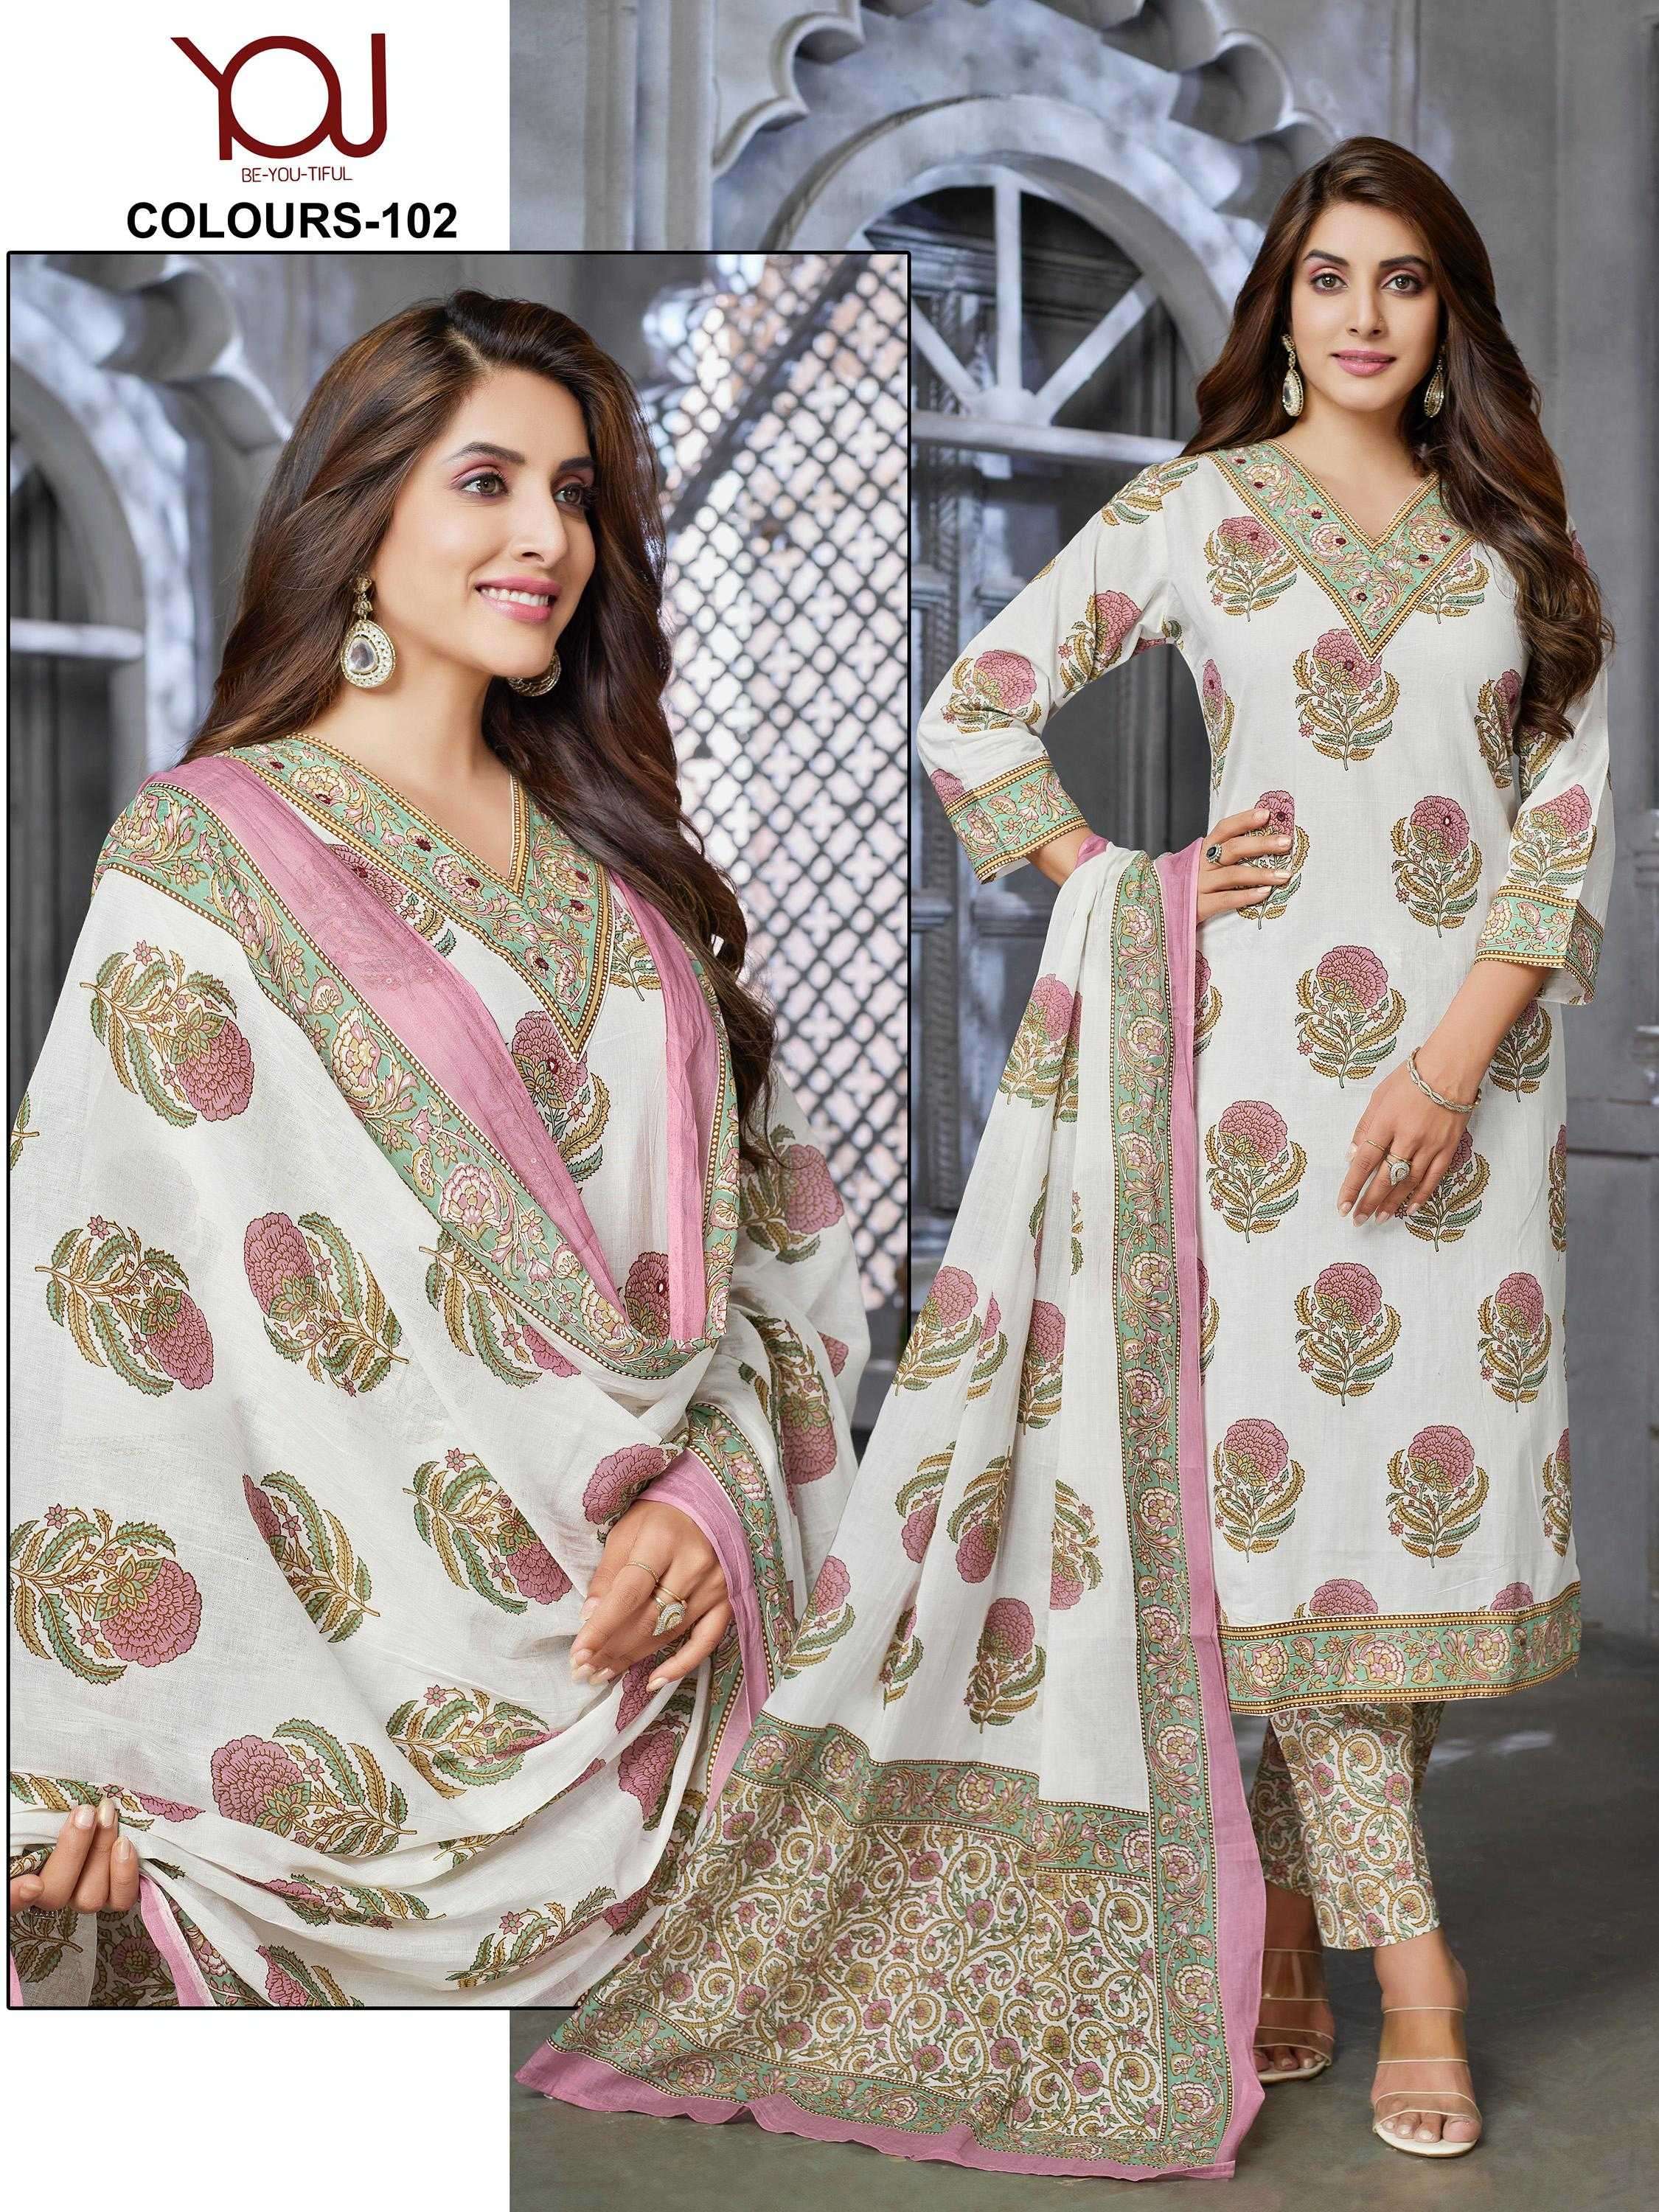 wanna colours series 101-102 Cambric Cotton readymade suit 